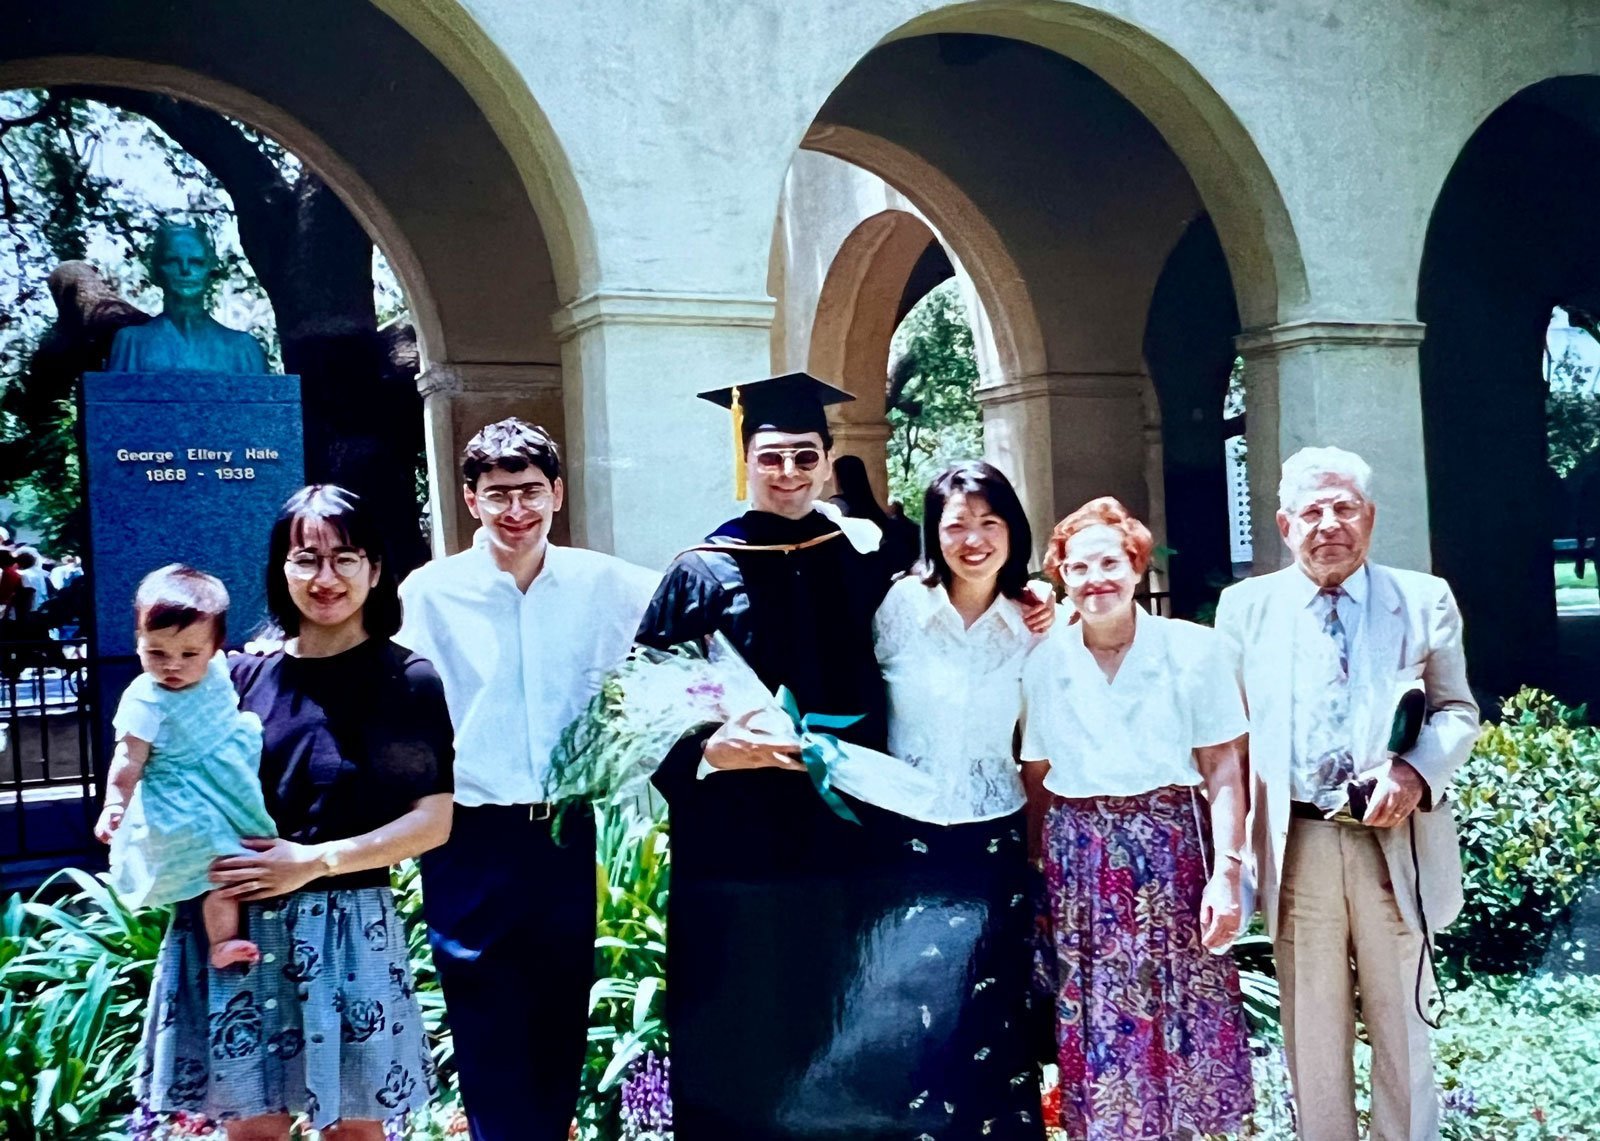  Patapoutian and family at Caltech’s commencement ceremony in 1996.  Photo courtesy Ardem Patapoutian.  